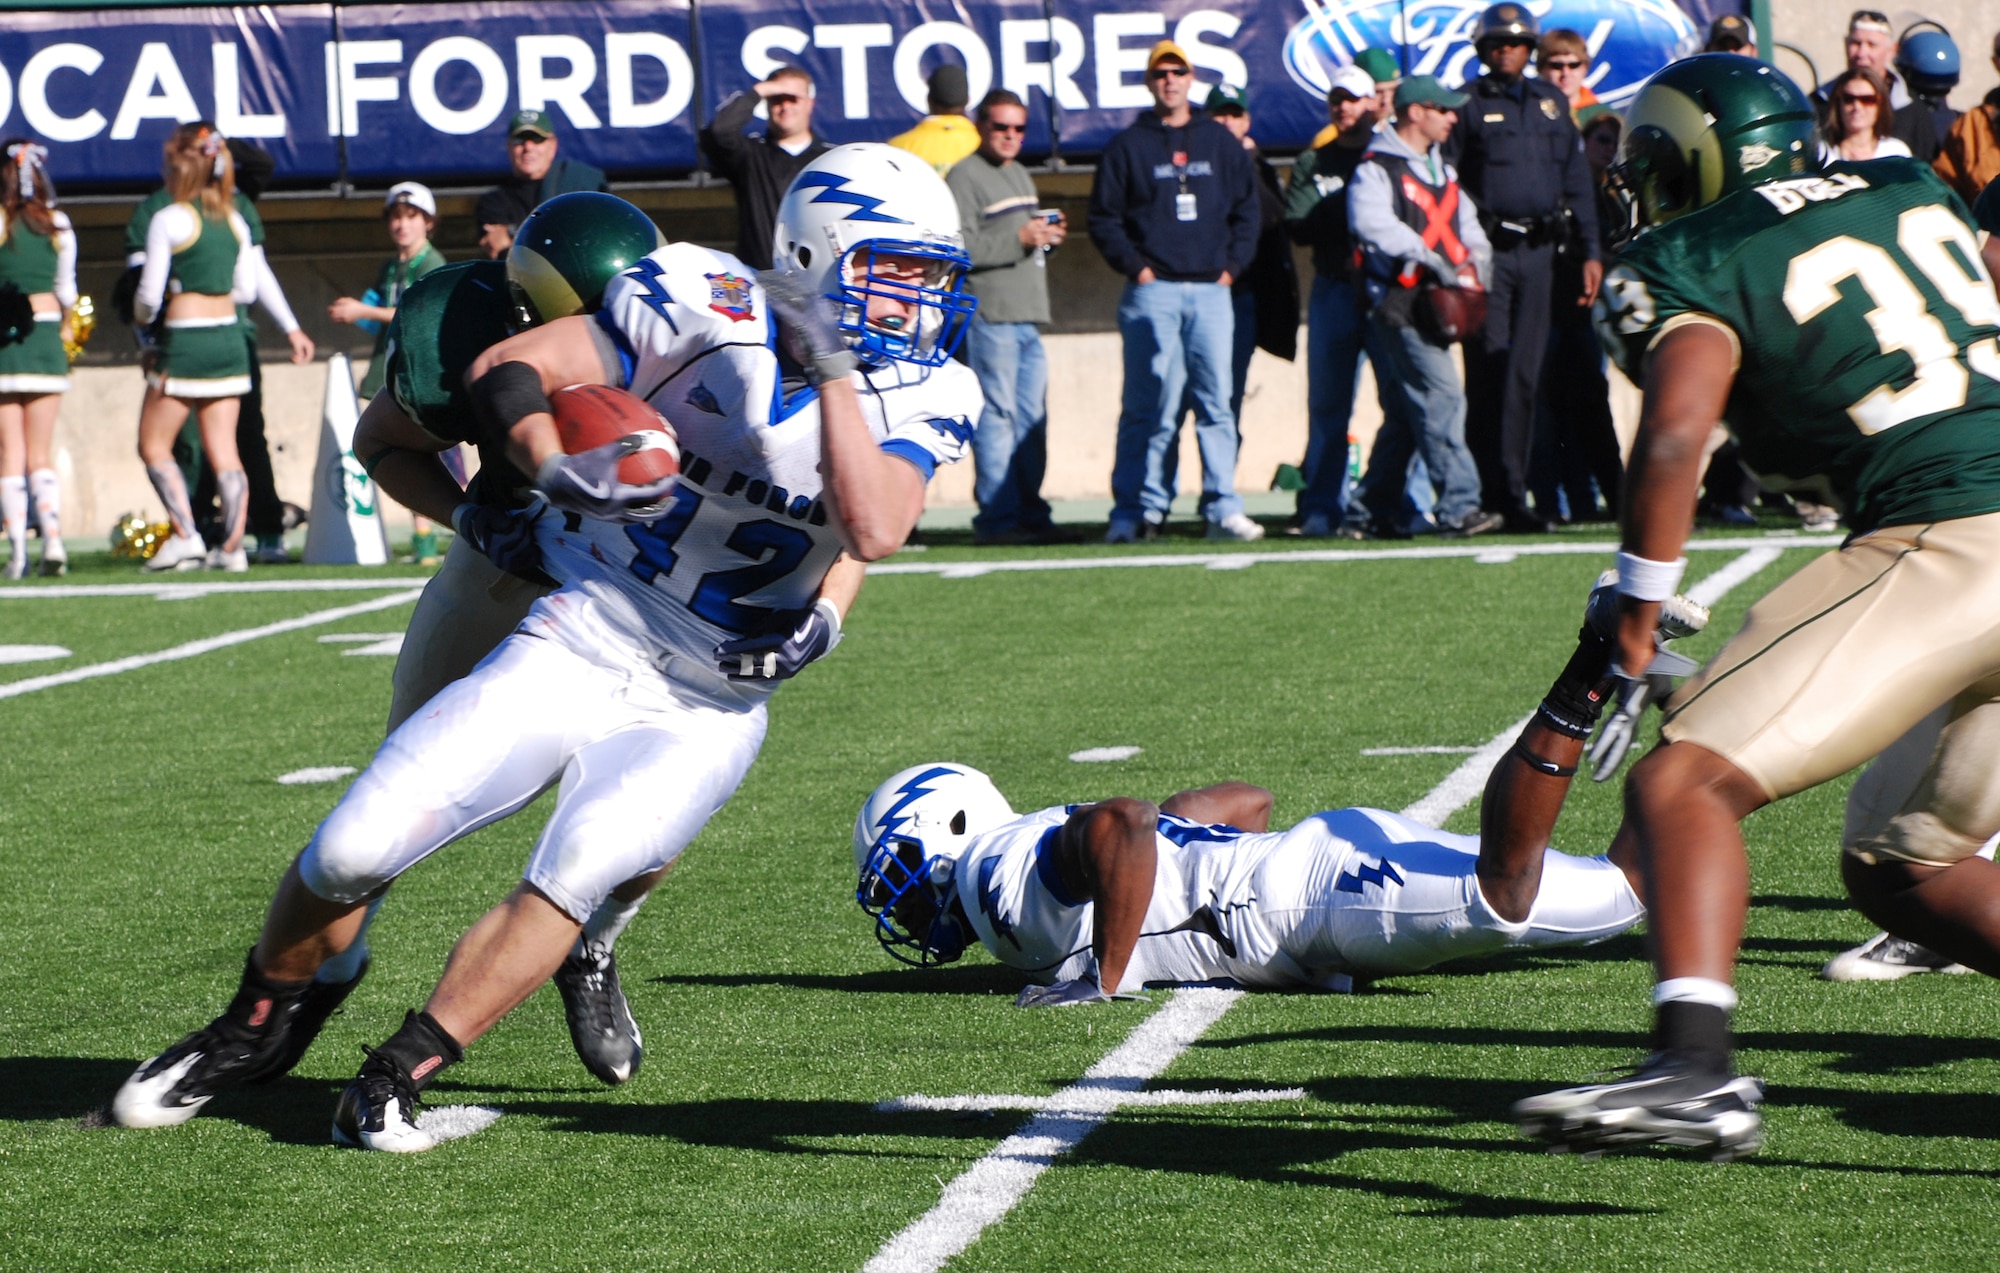 Falcons fullback Jared Tew looks to turn upfield as a Colorado State University defender tries to wrap him up during the Air Force-Colorado State match in Fort Collins, Colo., Oct. 31, 2009. The fullback had 145 all-purpose yards against CSU, including 58 yards on kick returns. (U.S. Air Force photo/Denise Navoy)